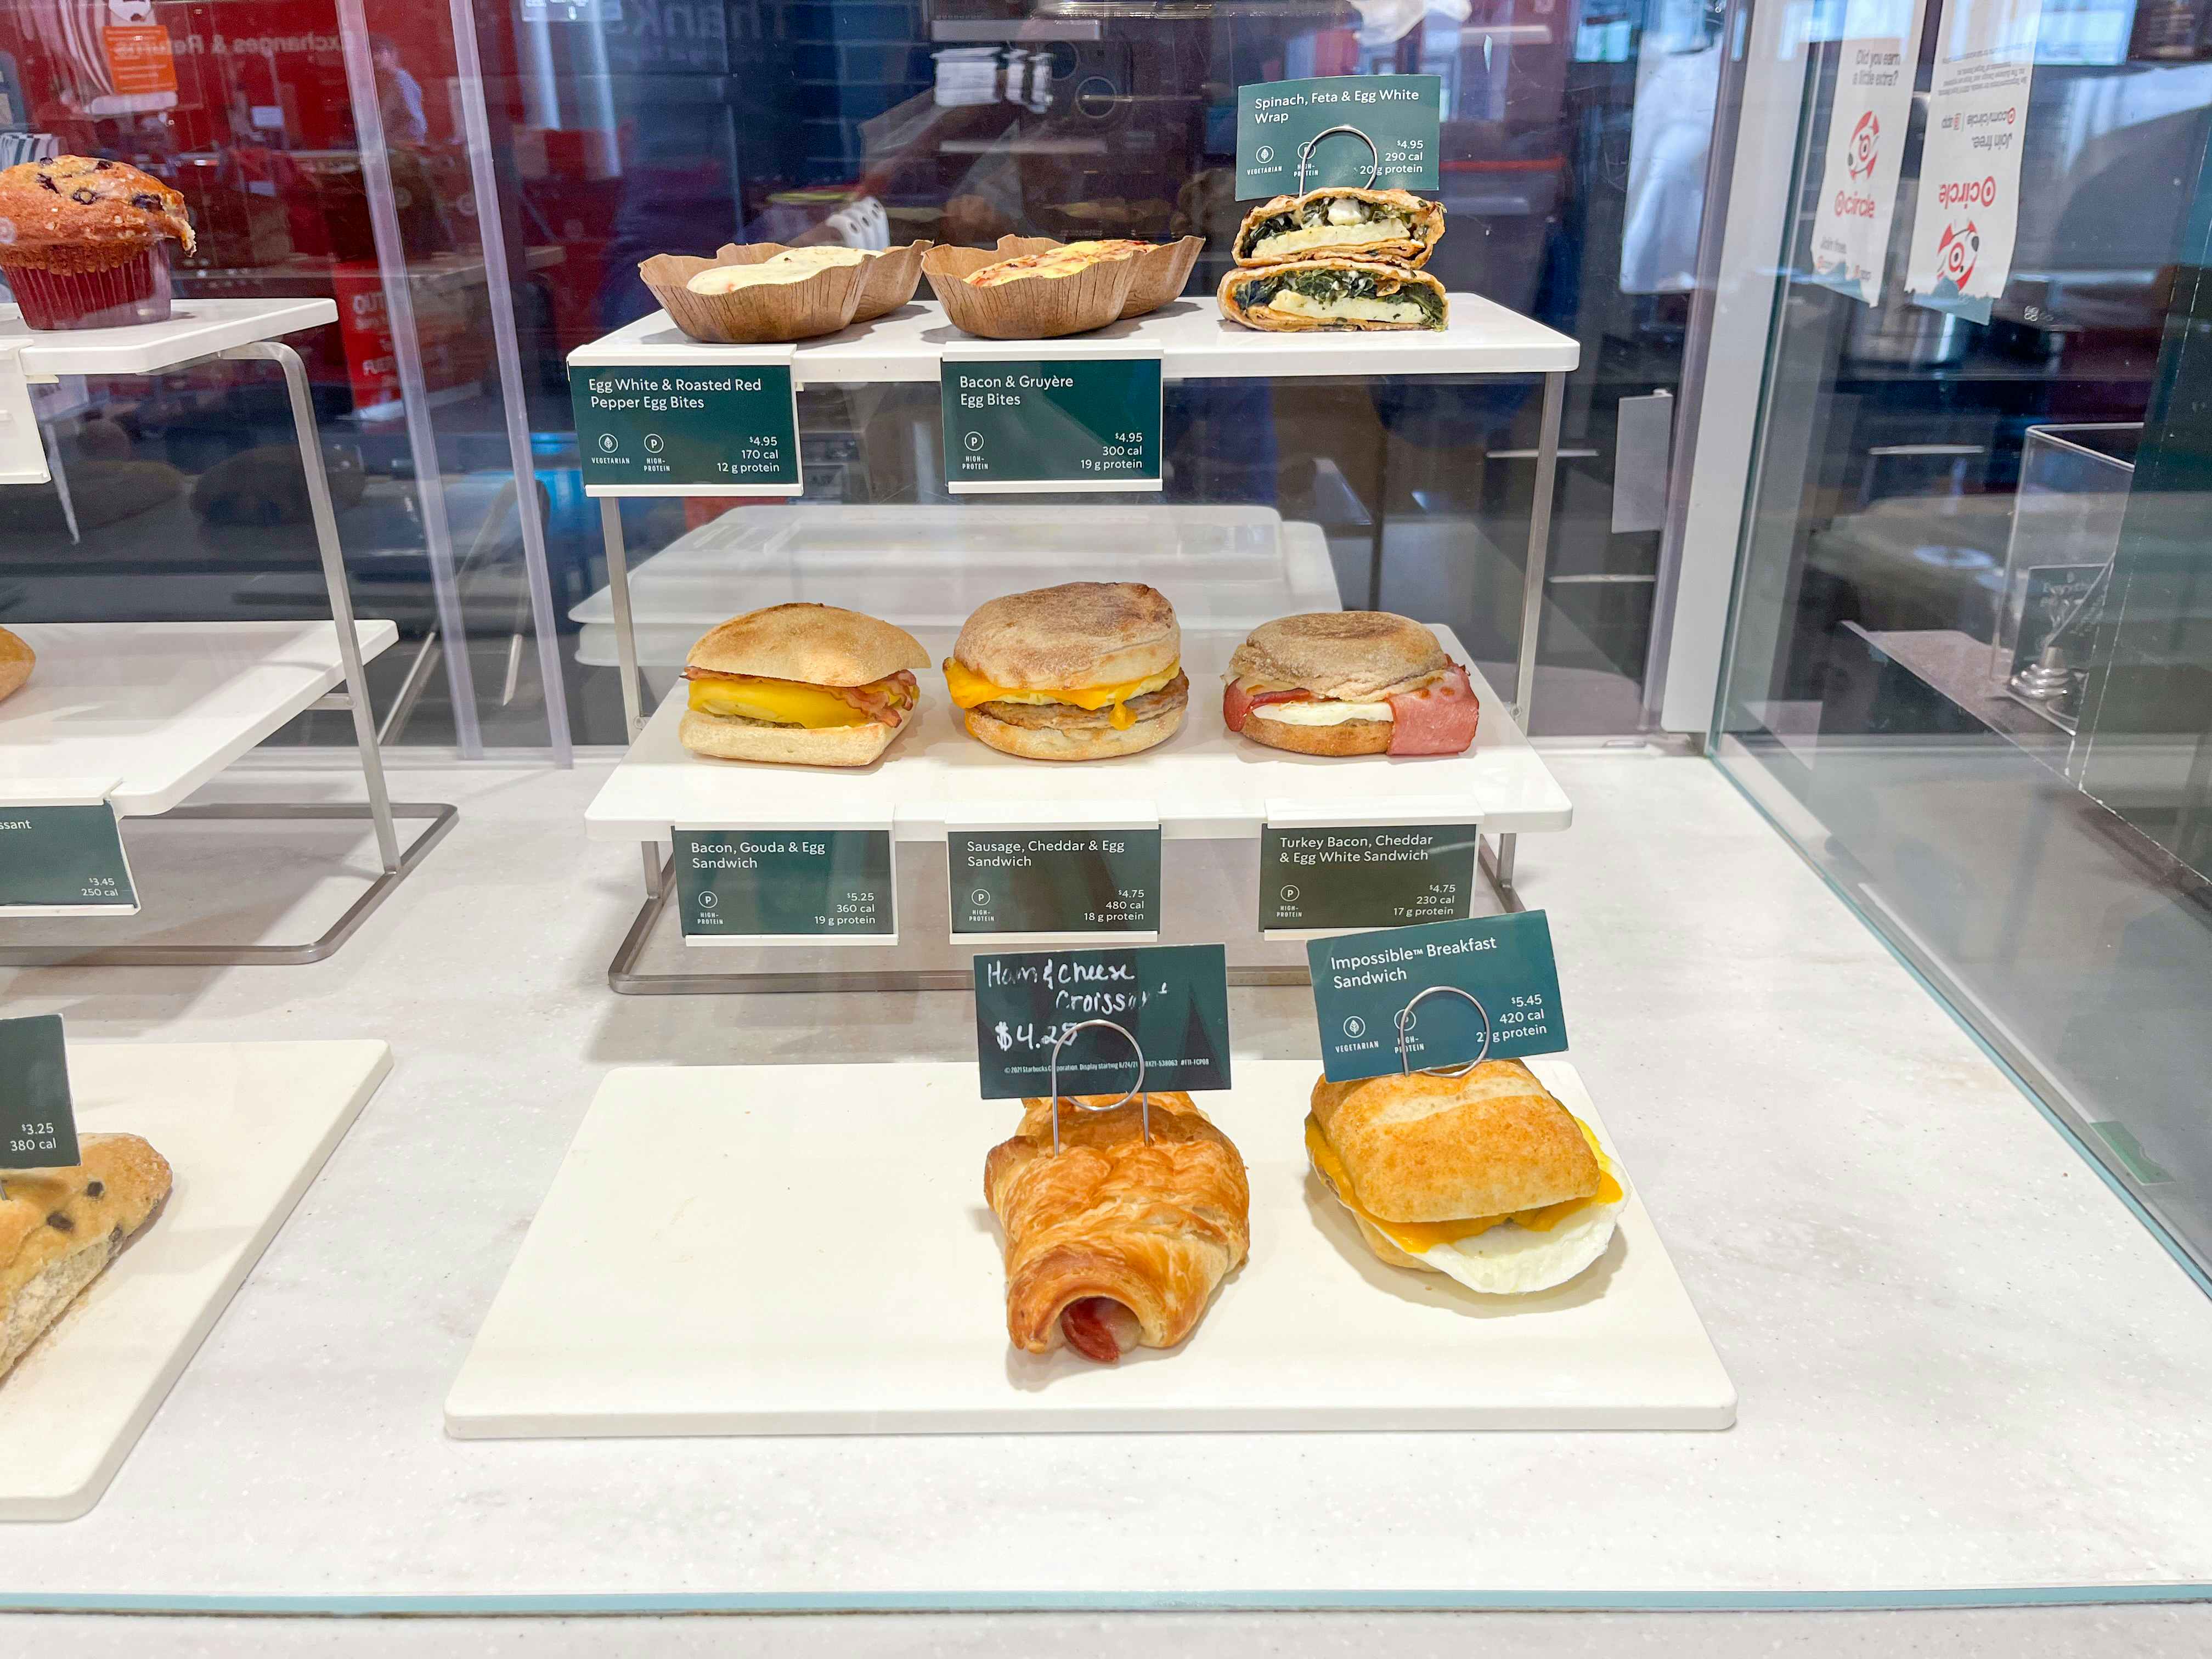 The enclosed sandwich display at a Starbucks counter featuring the different savory foods you can order.